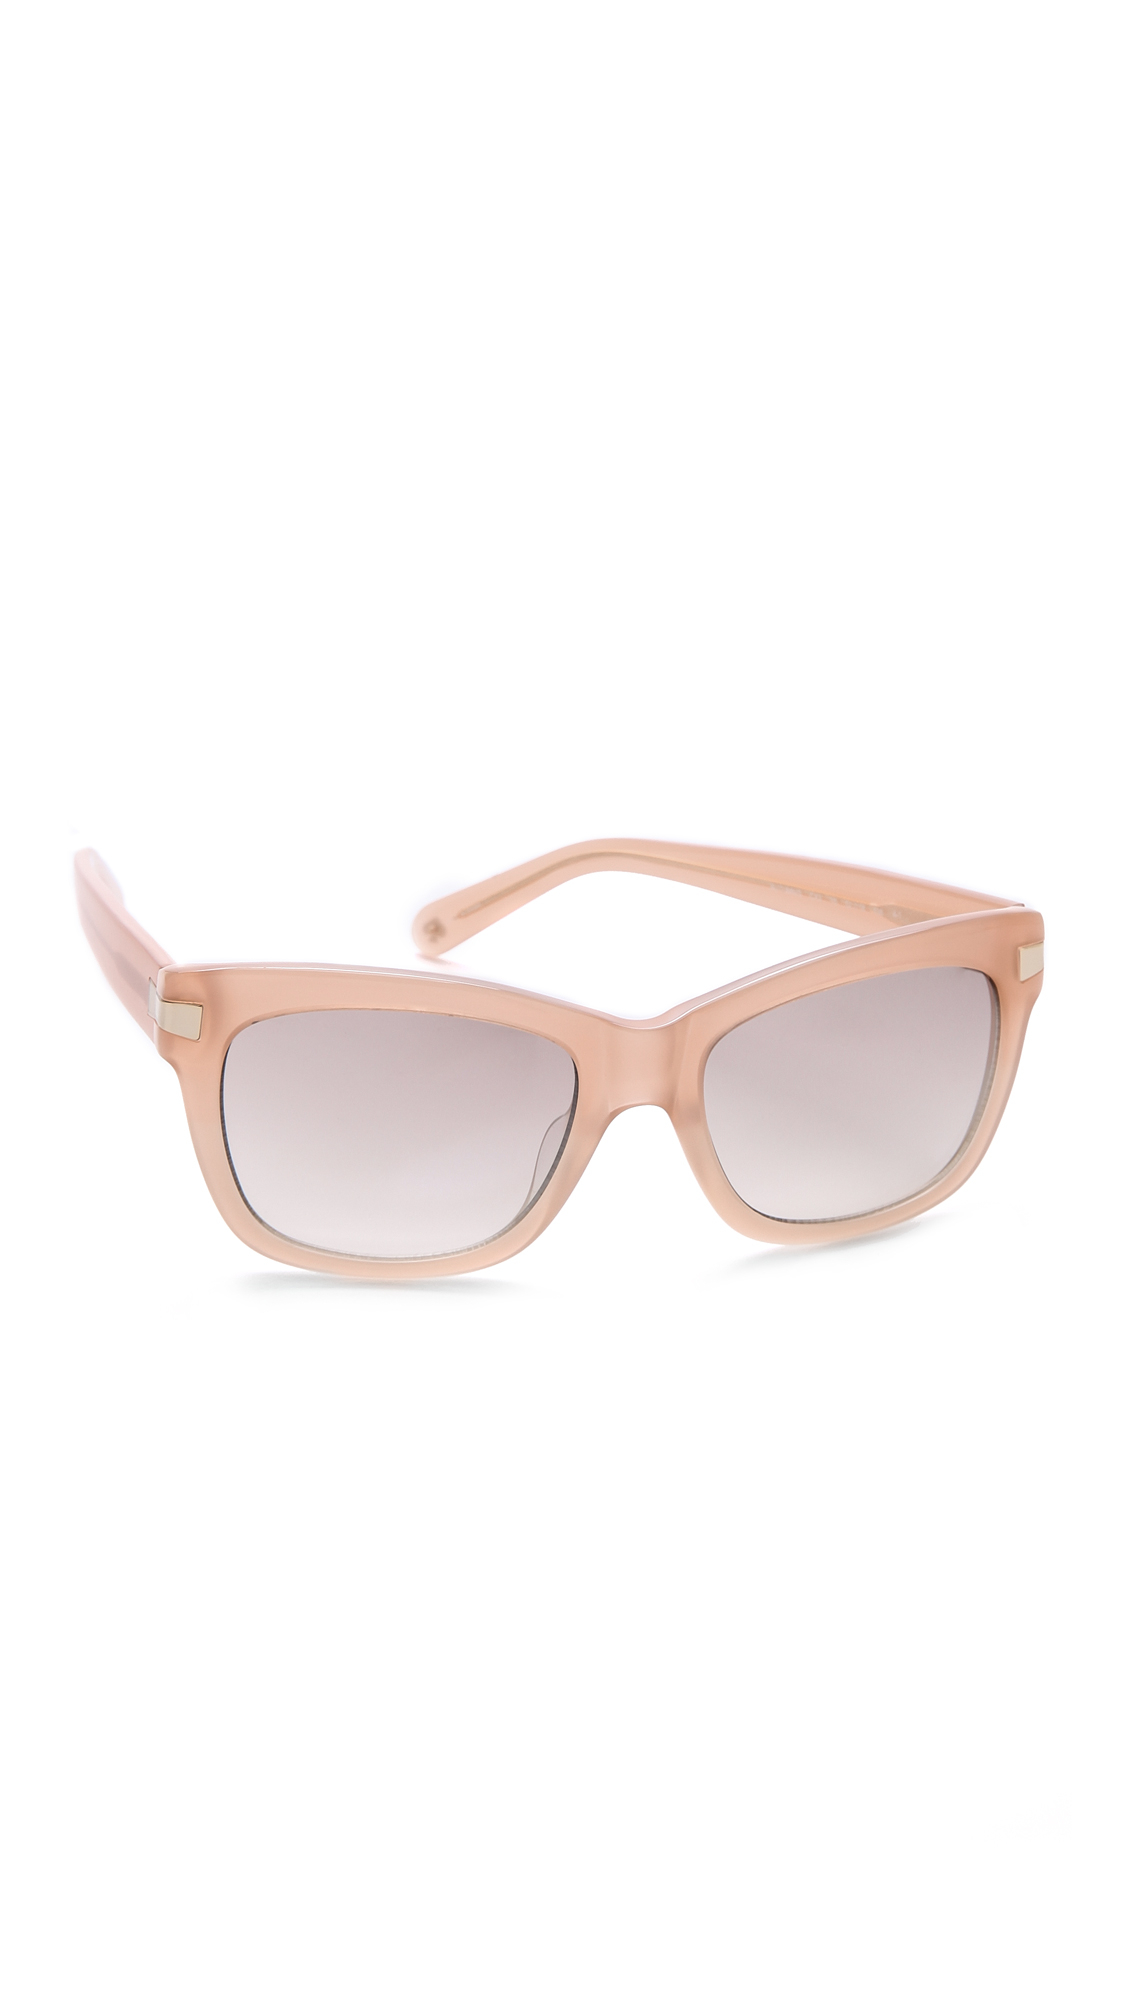 Lyst - Kate Spade New York Autumn Sunglasses in Pink